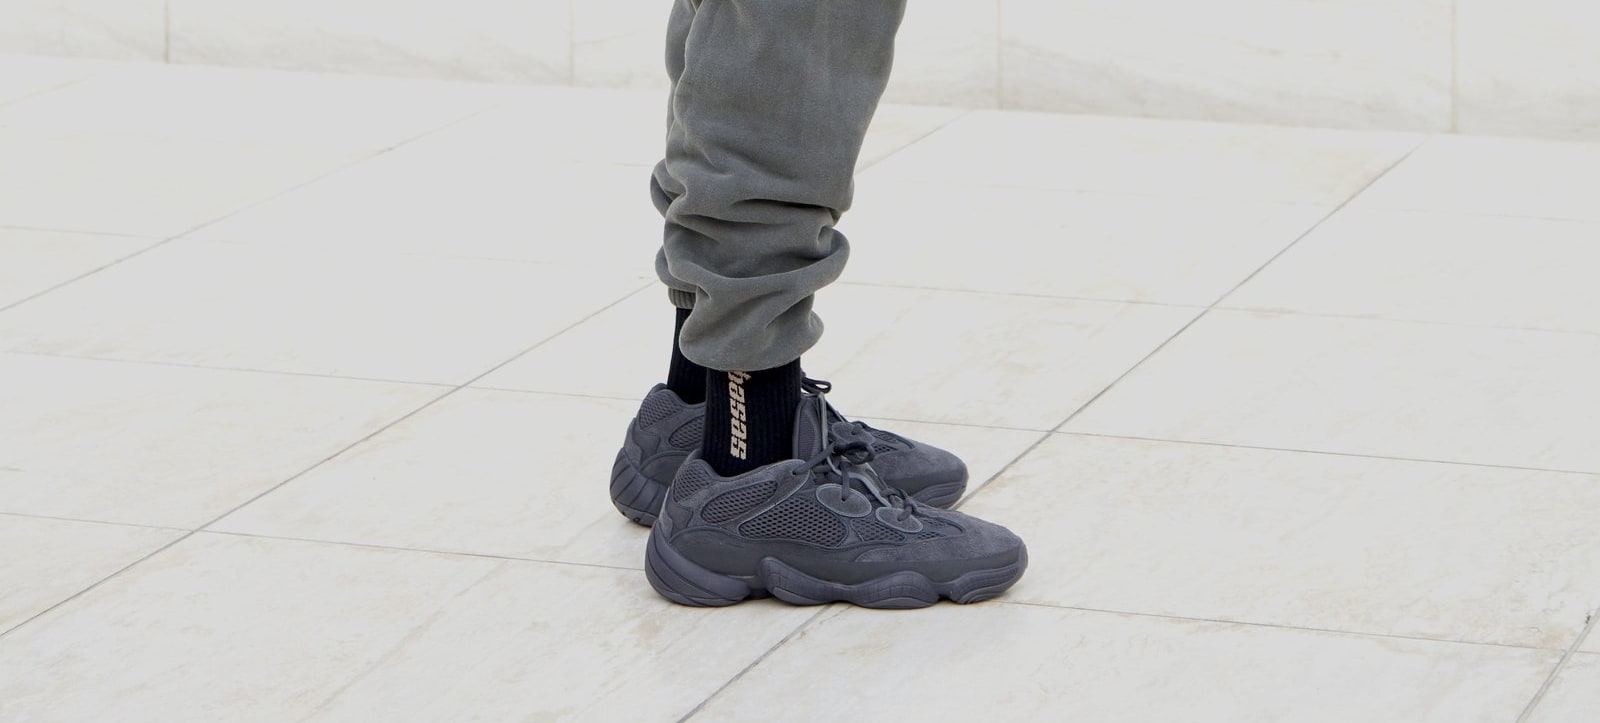 giay theo thao dat nhat q3.2018 - Yeezy Boost 500 “Utility Black” - elle man